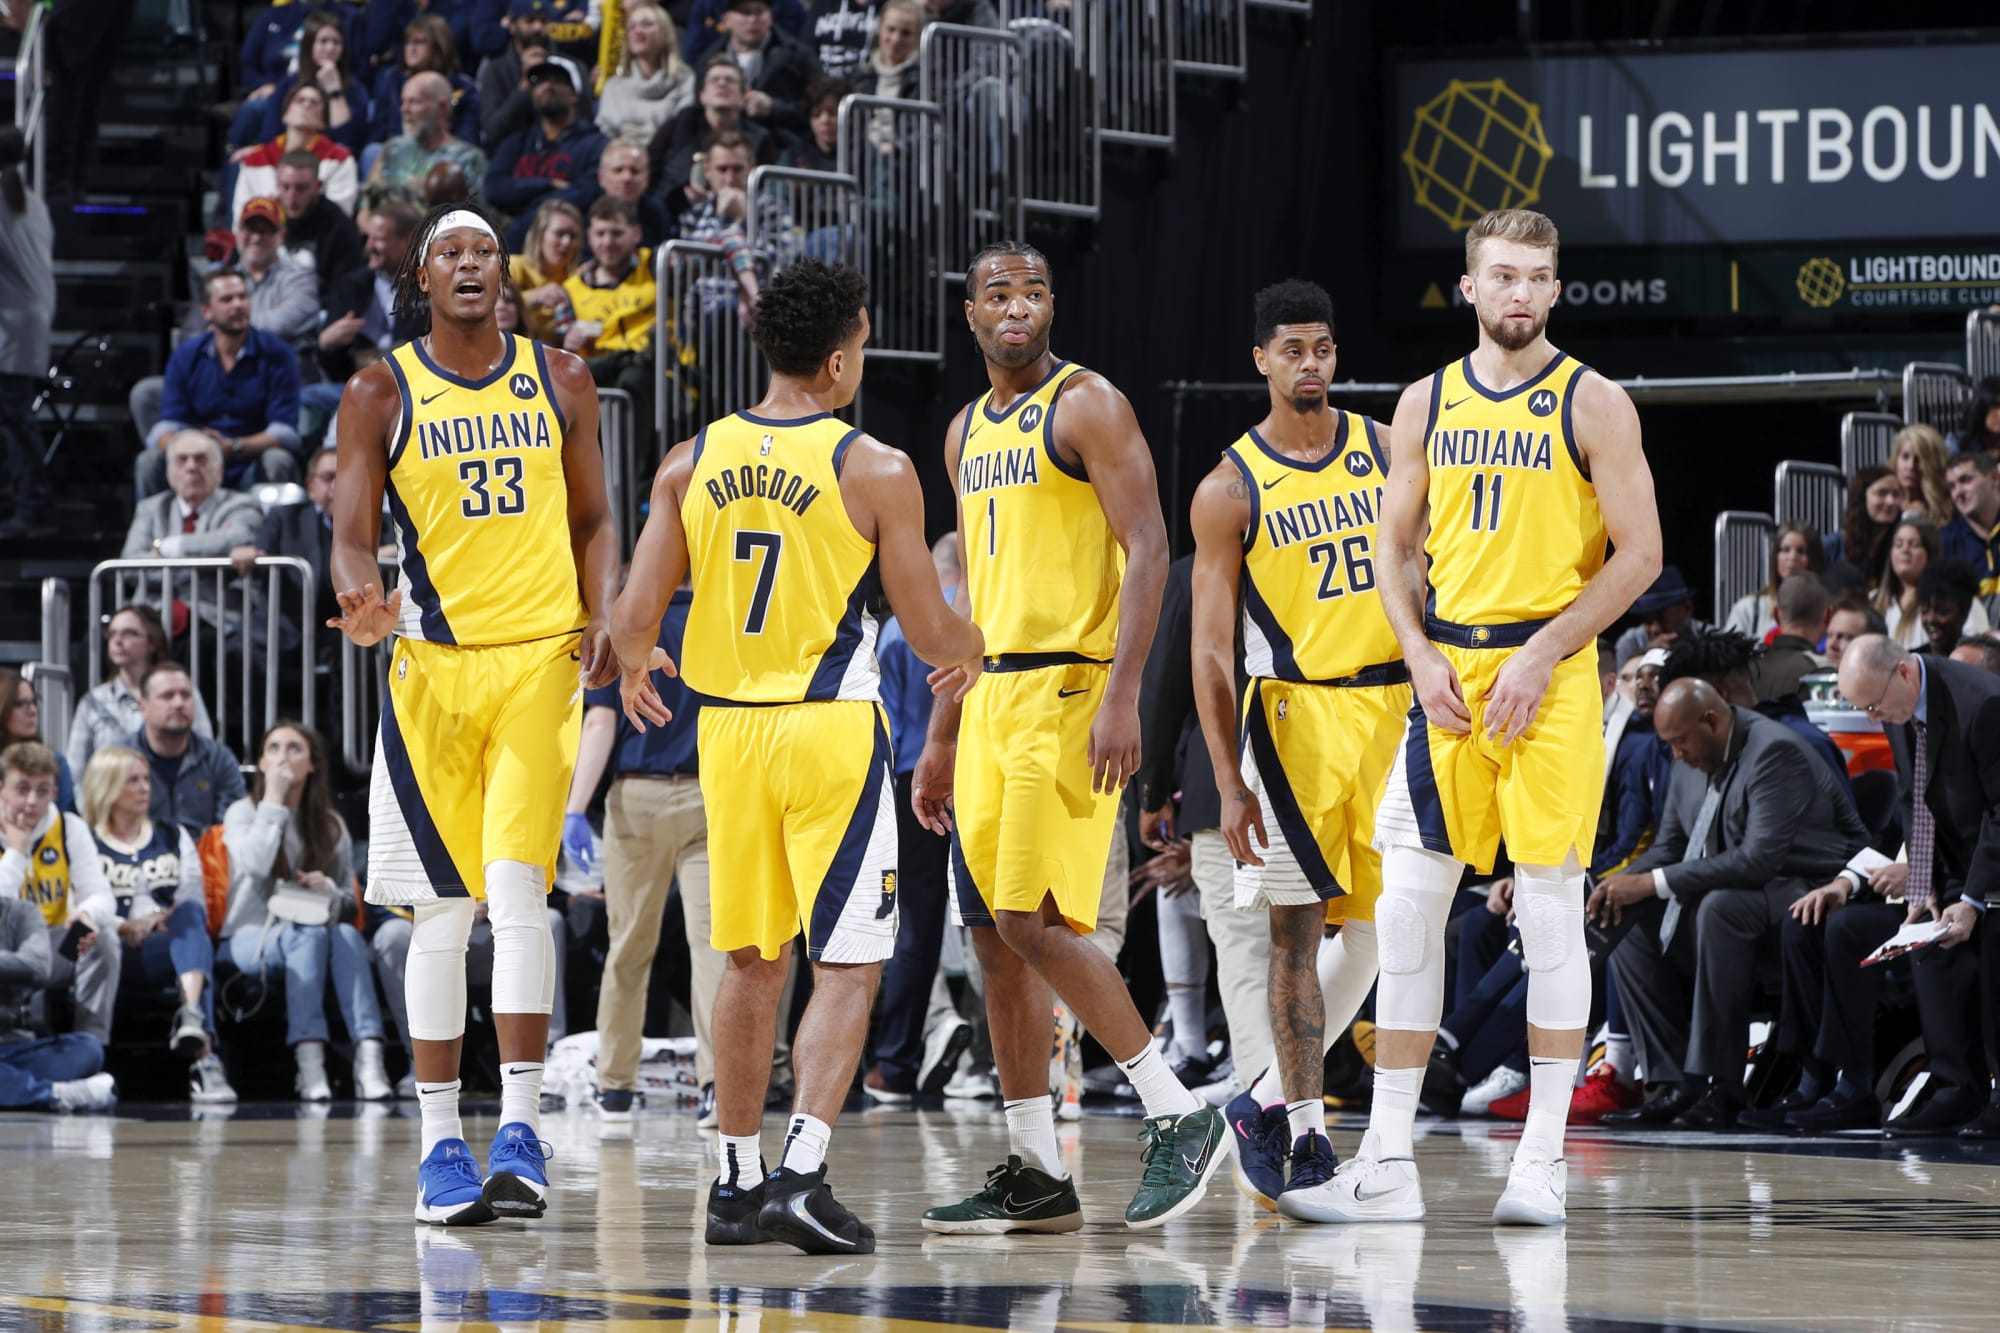 indiana pacers roster 2021-22